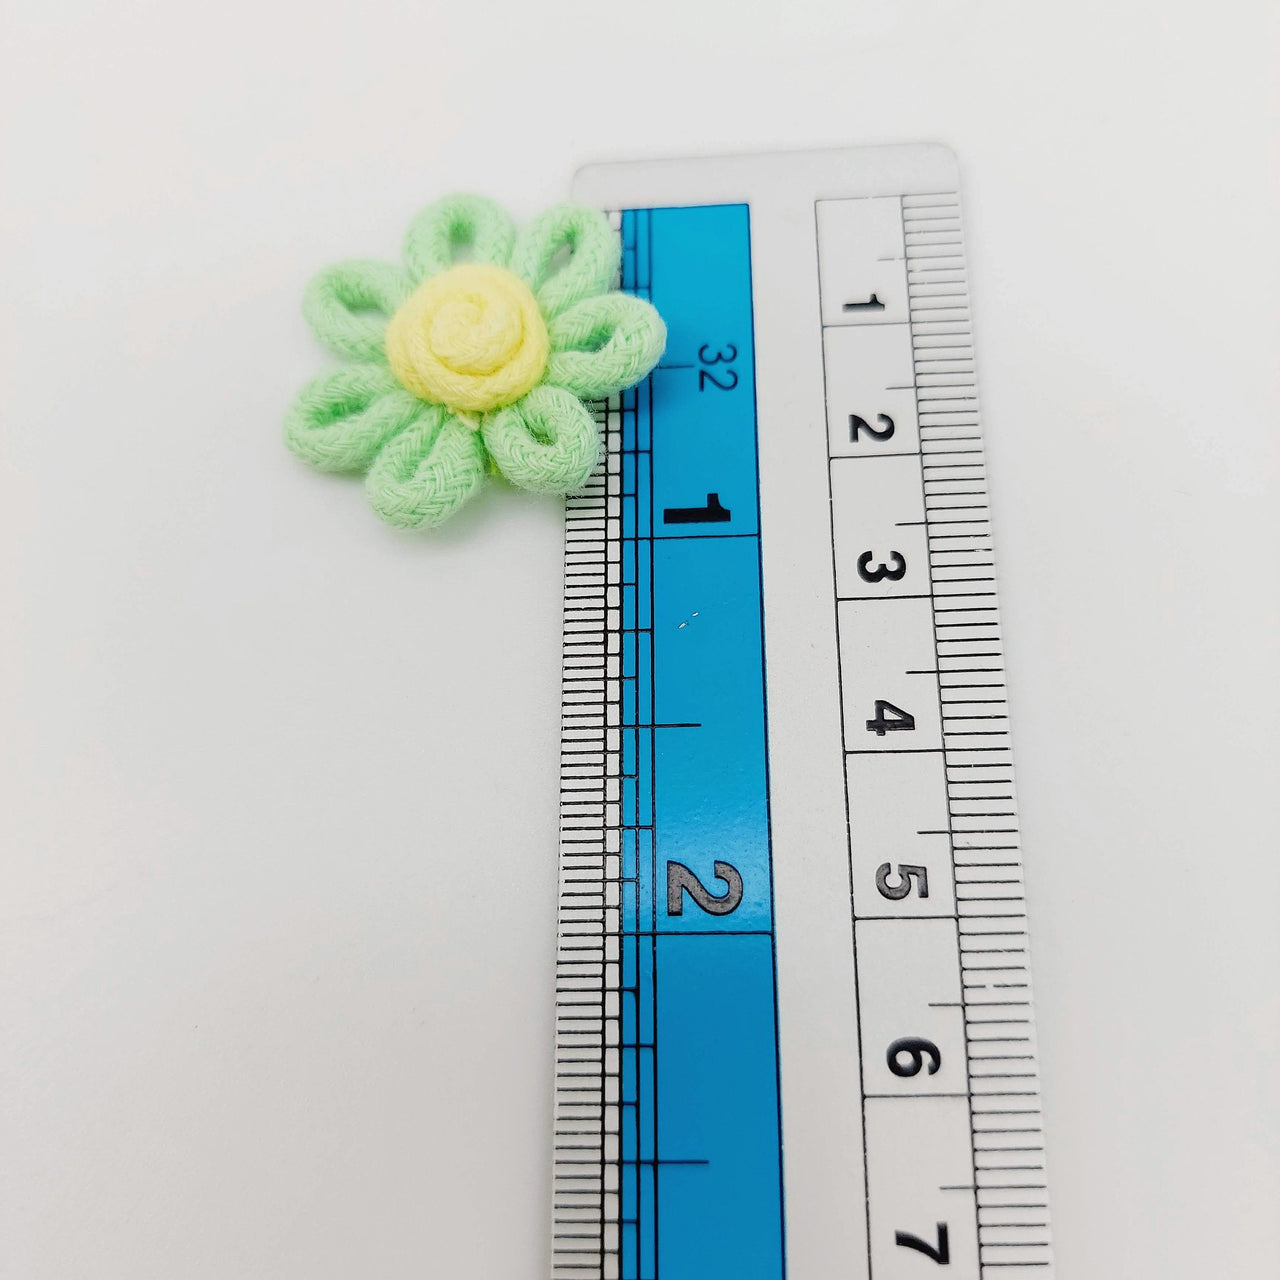 Green and Yellow Floral Applique, Flower Motifs x 5